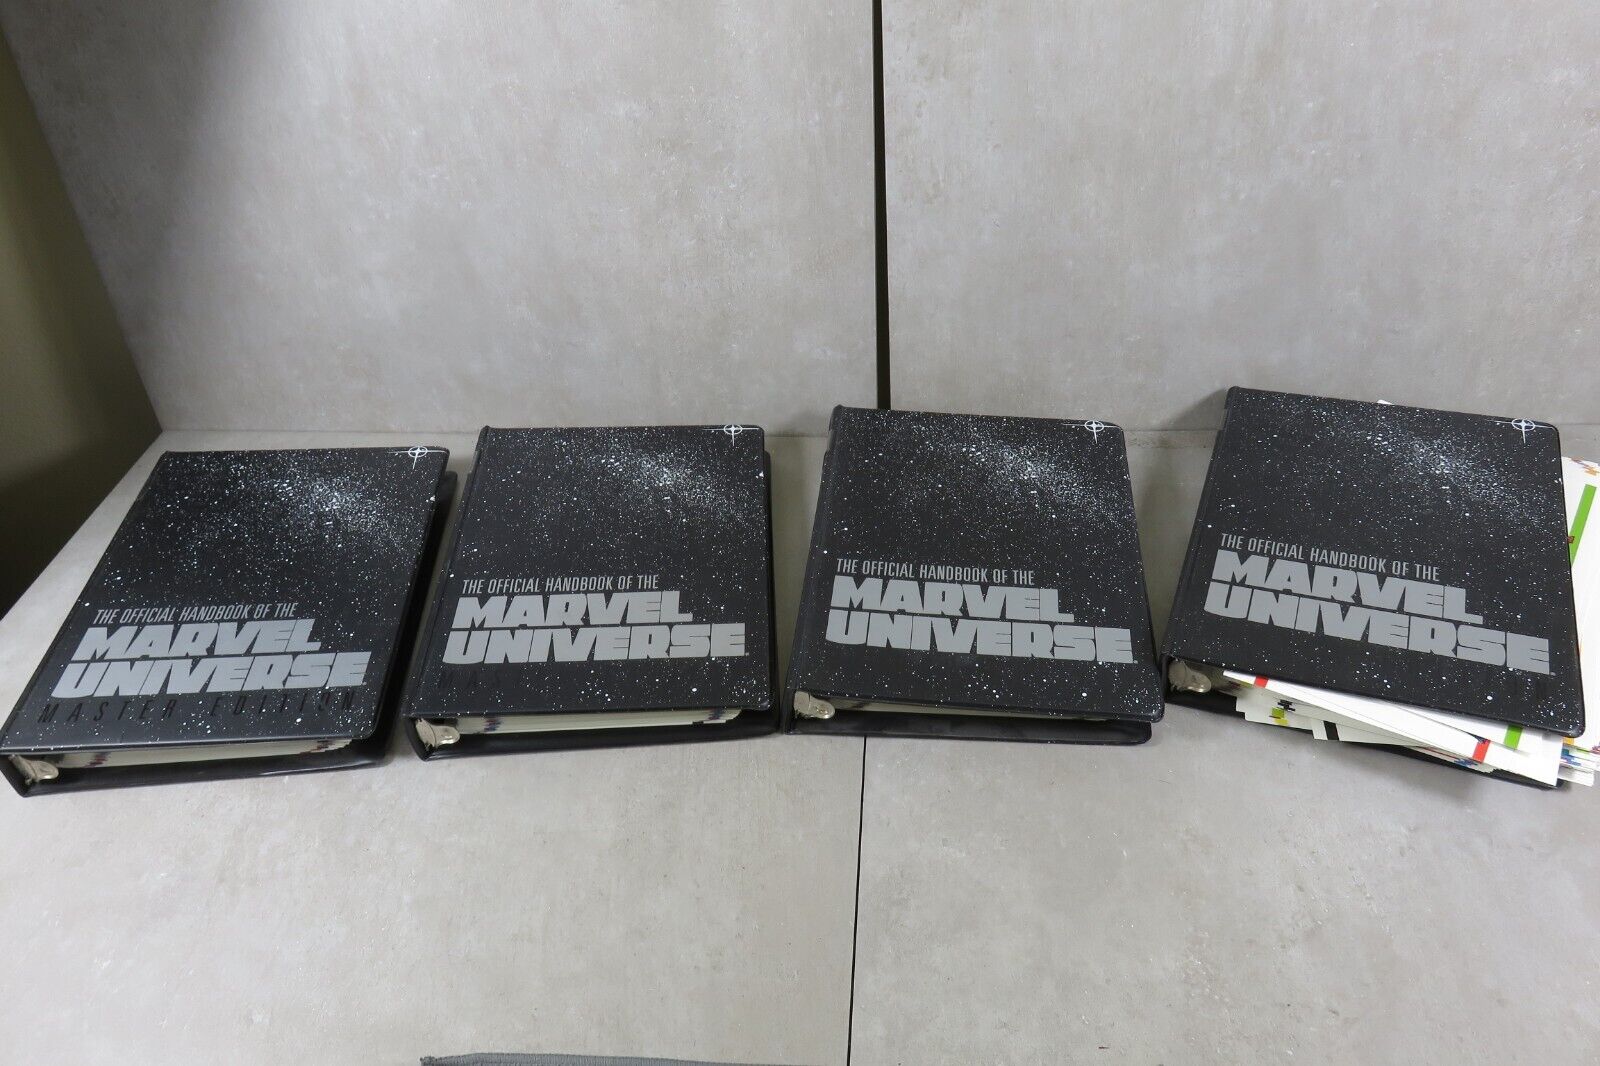 Official Handbook of the Marvel Universe Master Edition 4 Binders SEE PHOTOS